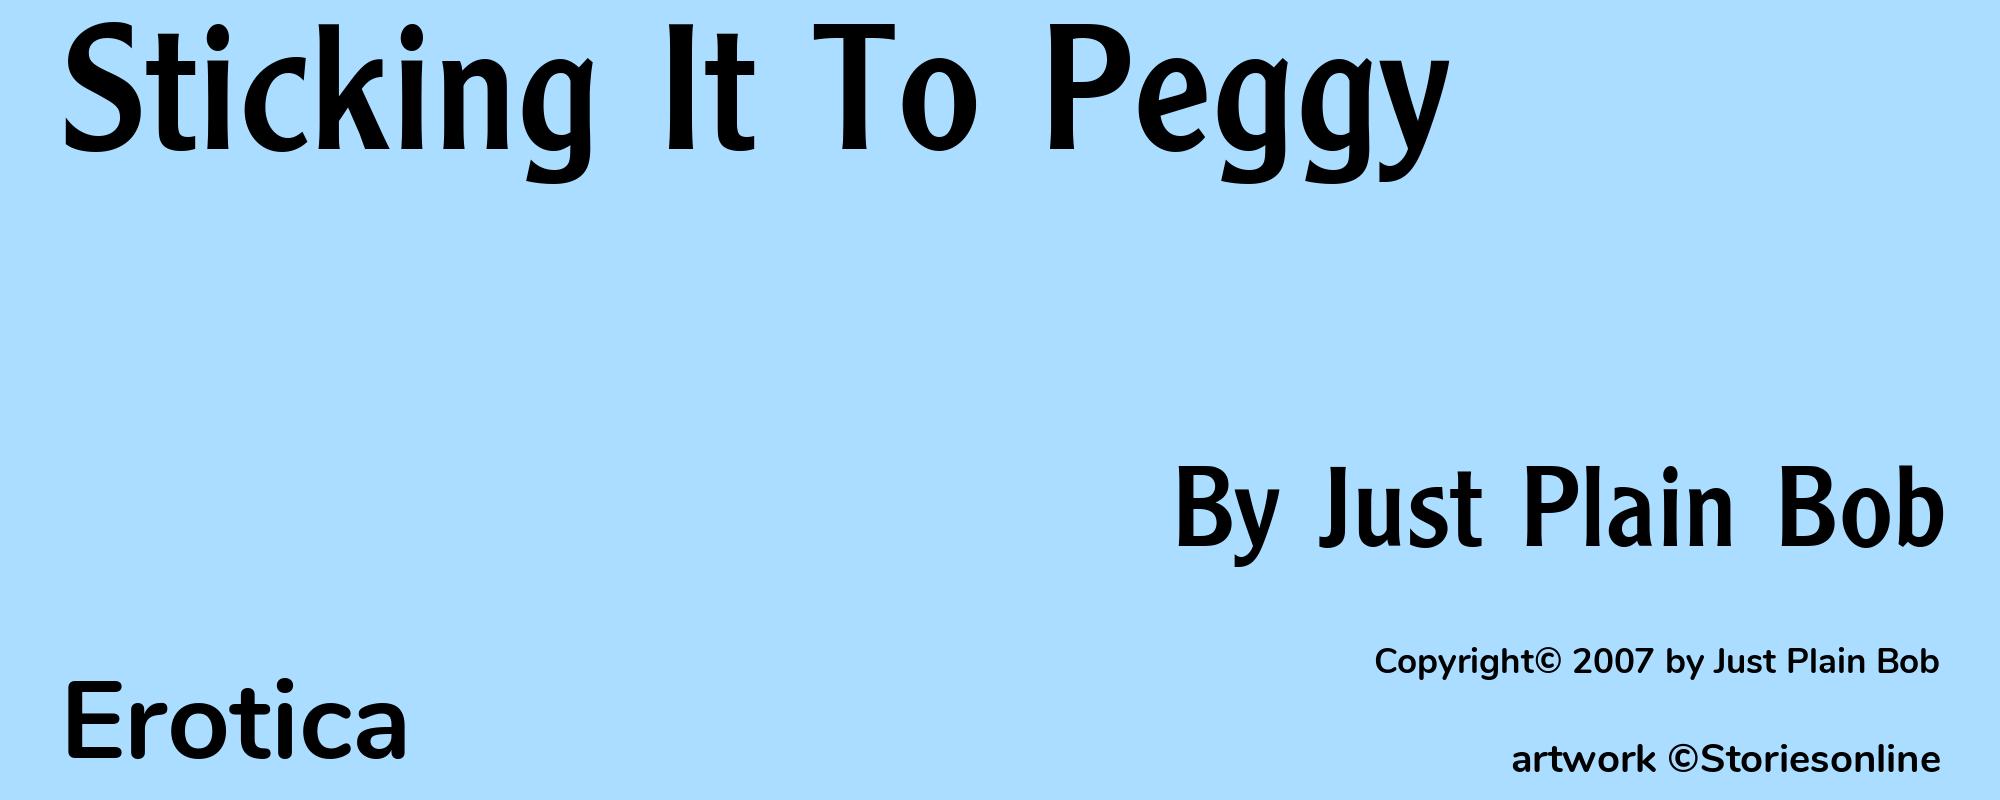 Sticking It To Peggy - Cover